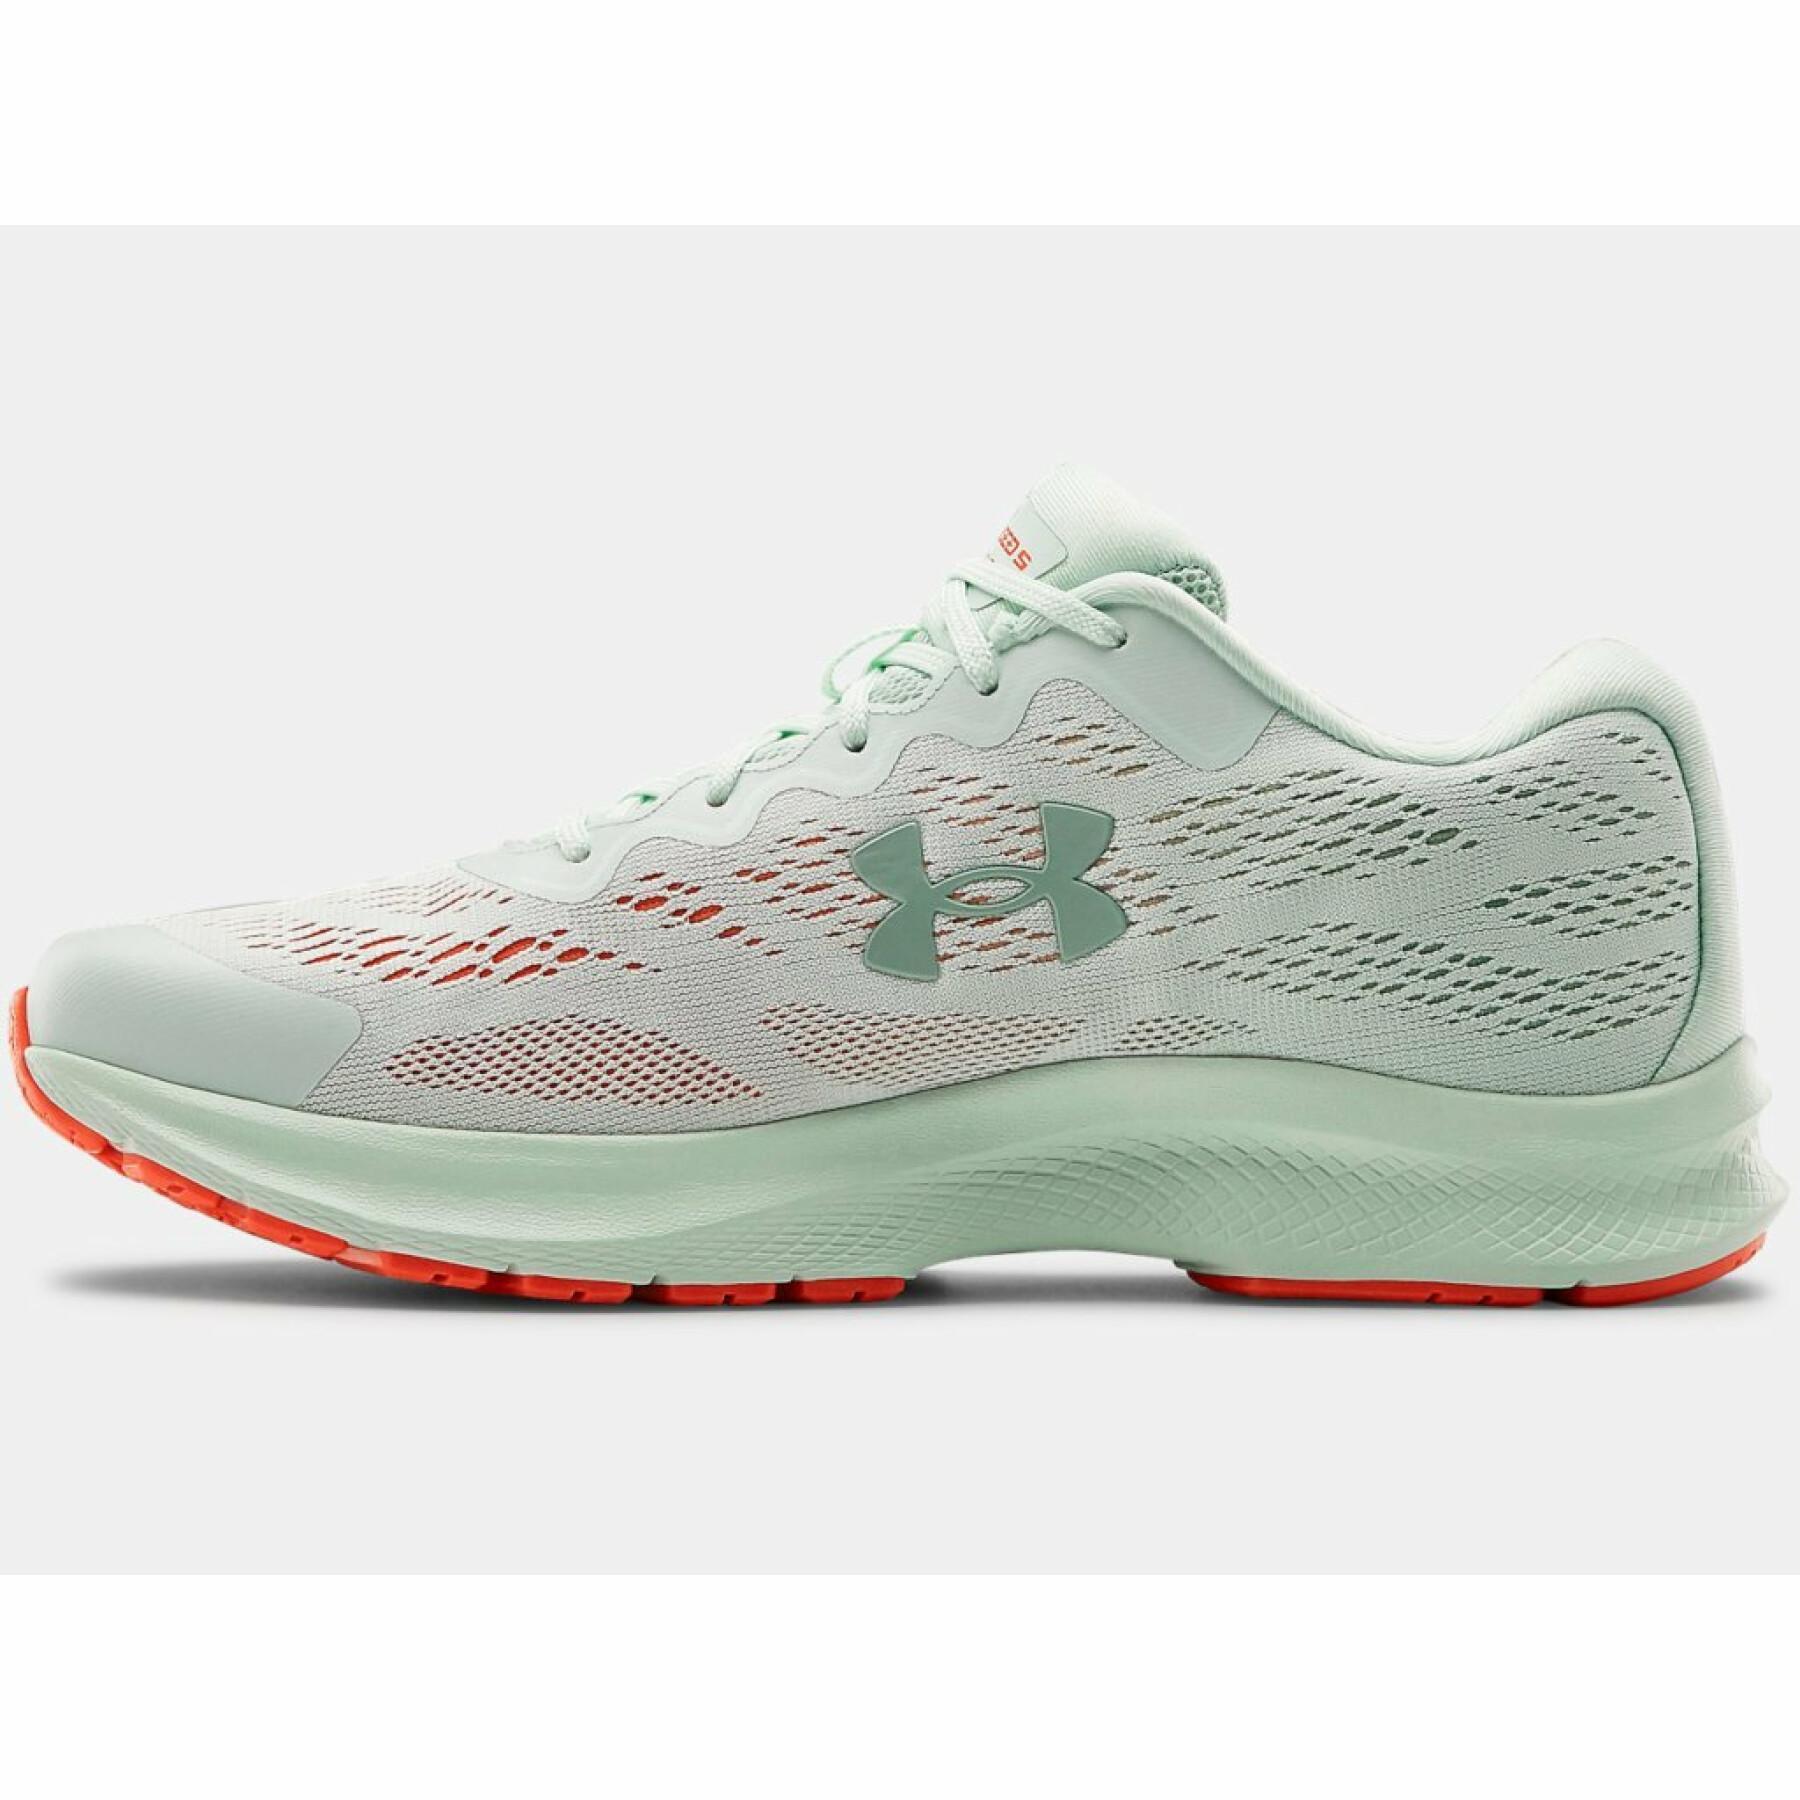 Women's shoes Under Armour Charged Bandit 6